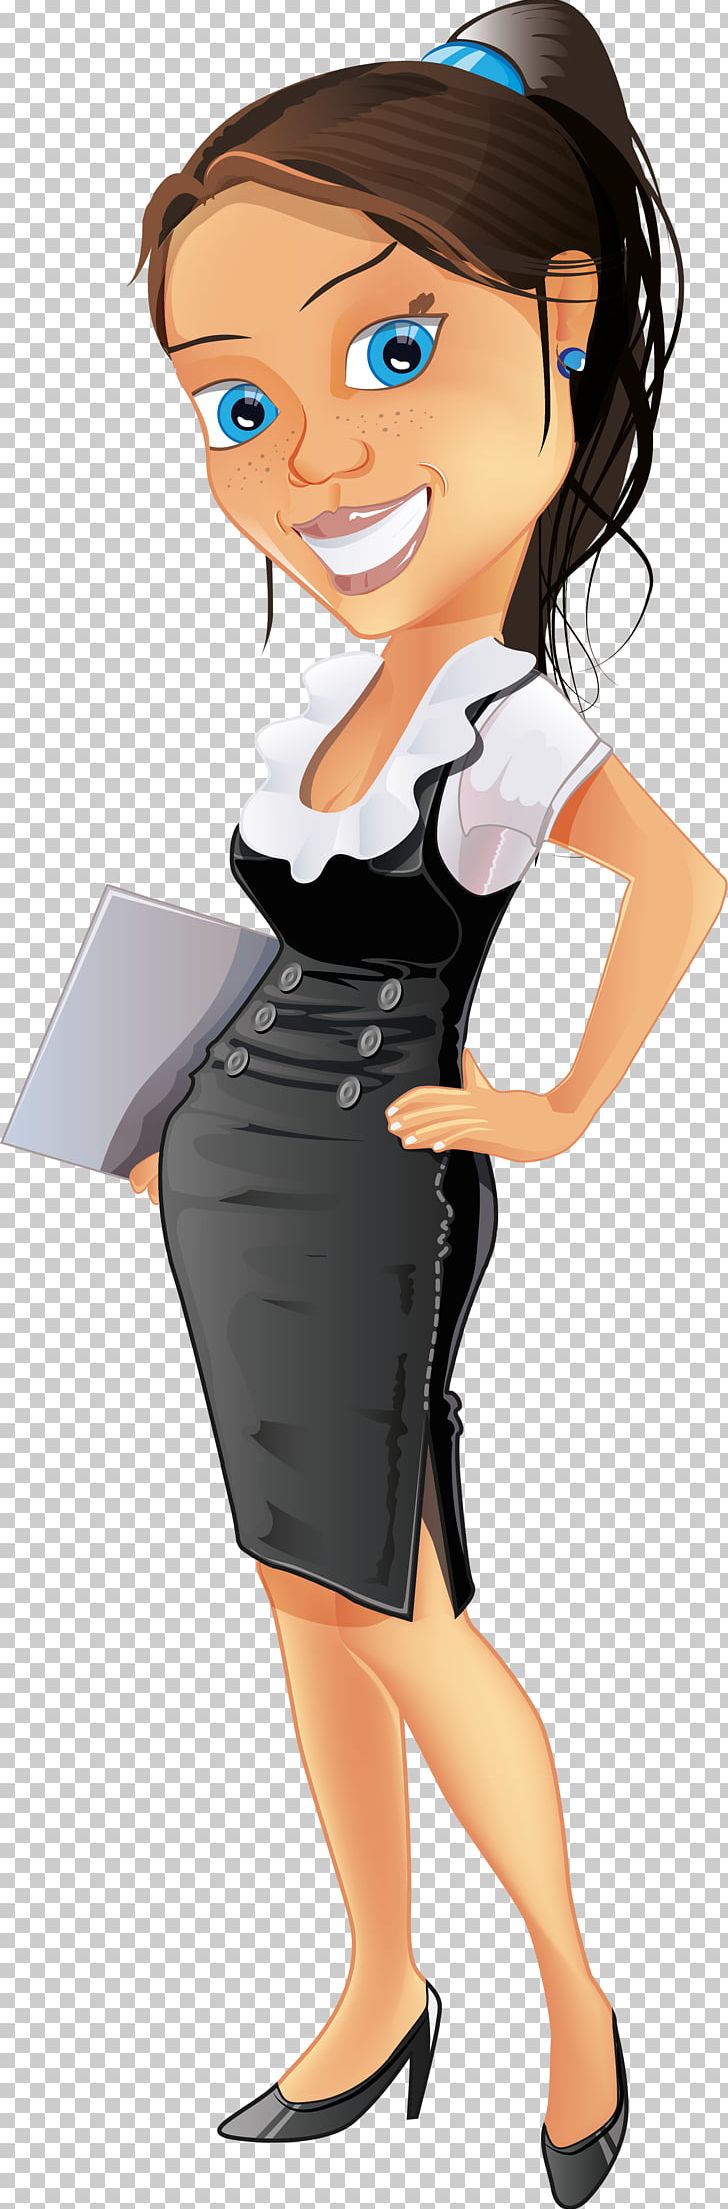 Businessperson Woman PNG, Clipart, Black Hair, Brown Hair, Business, Businessperson, Cartoon Free PNG Download